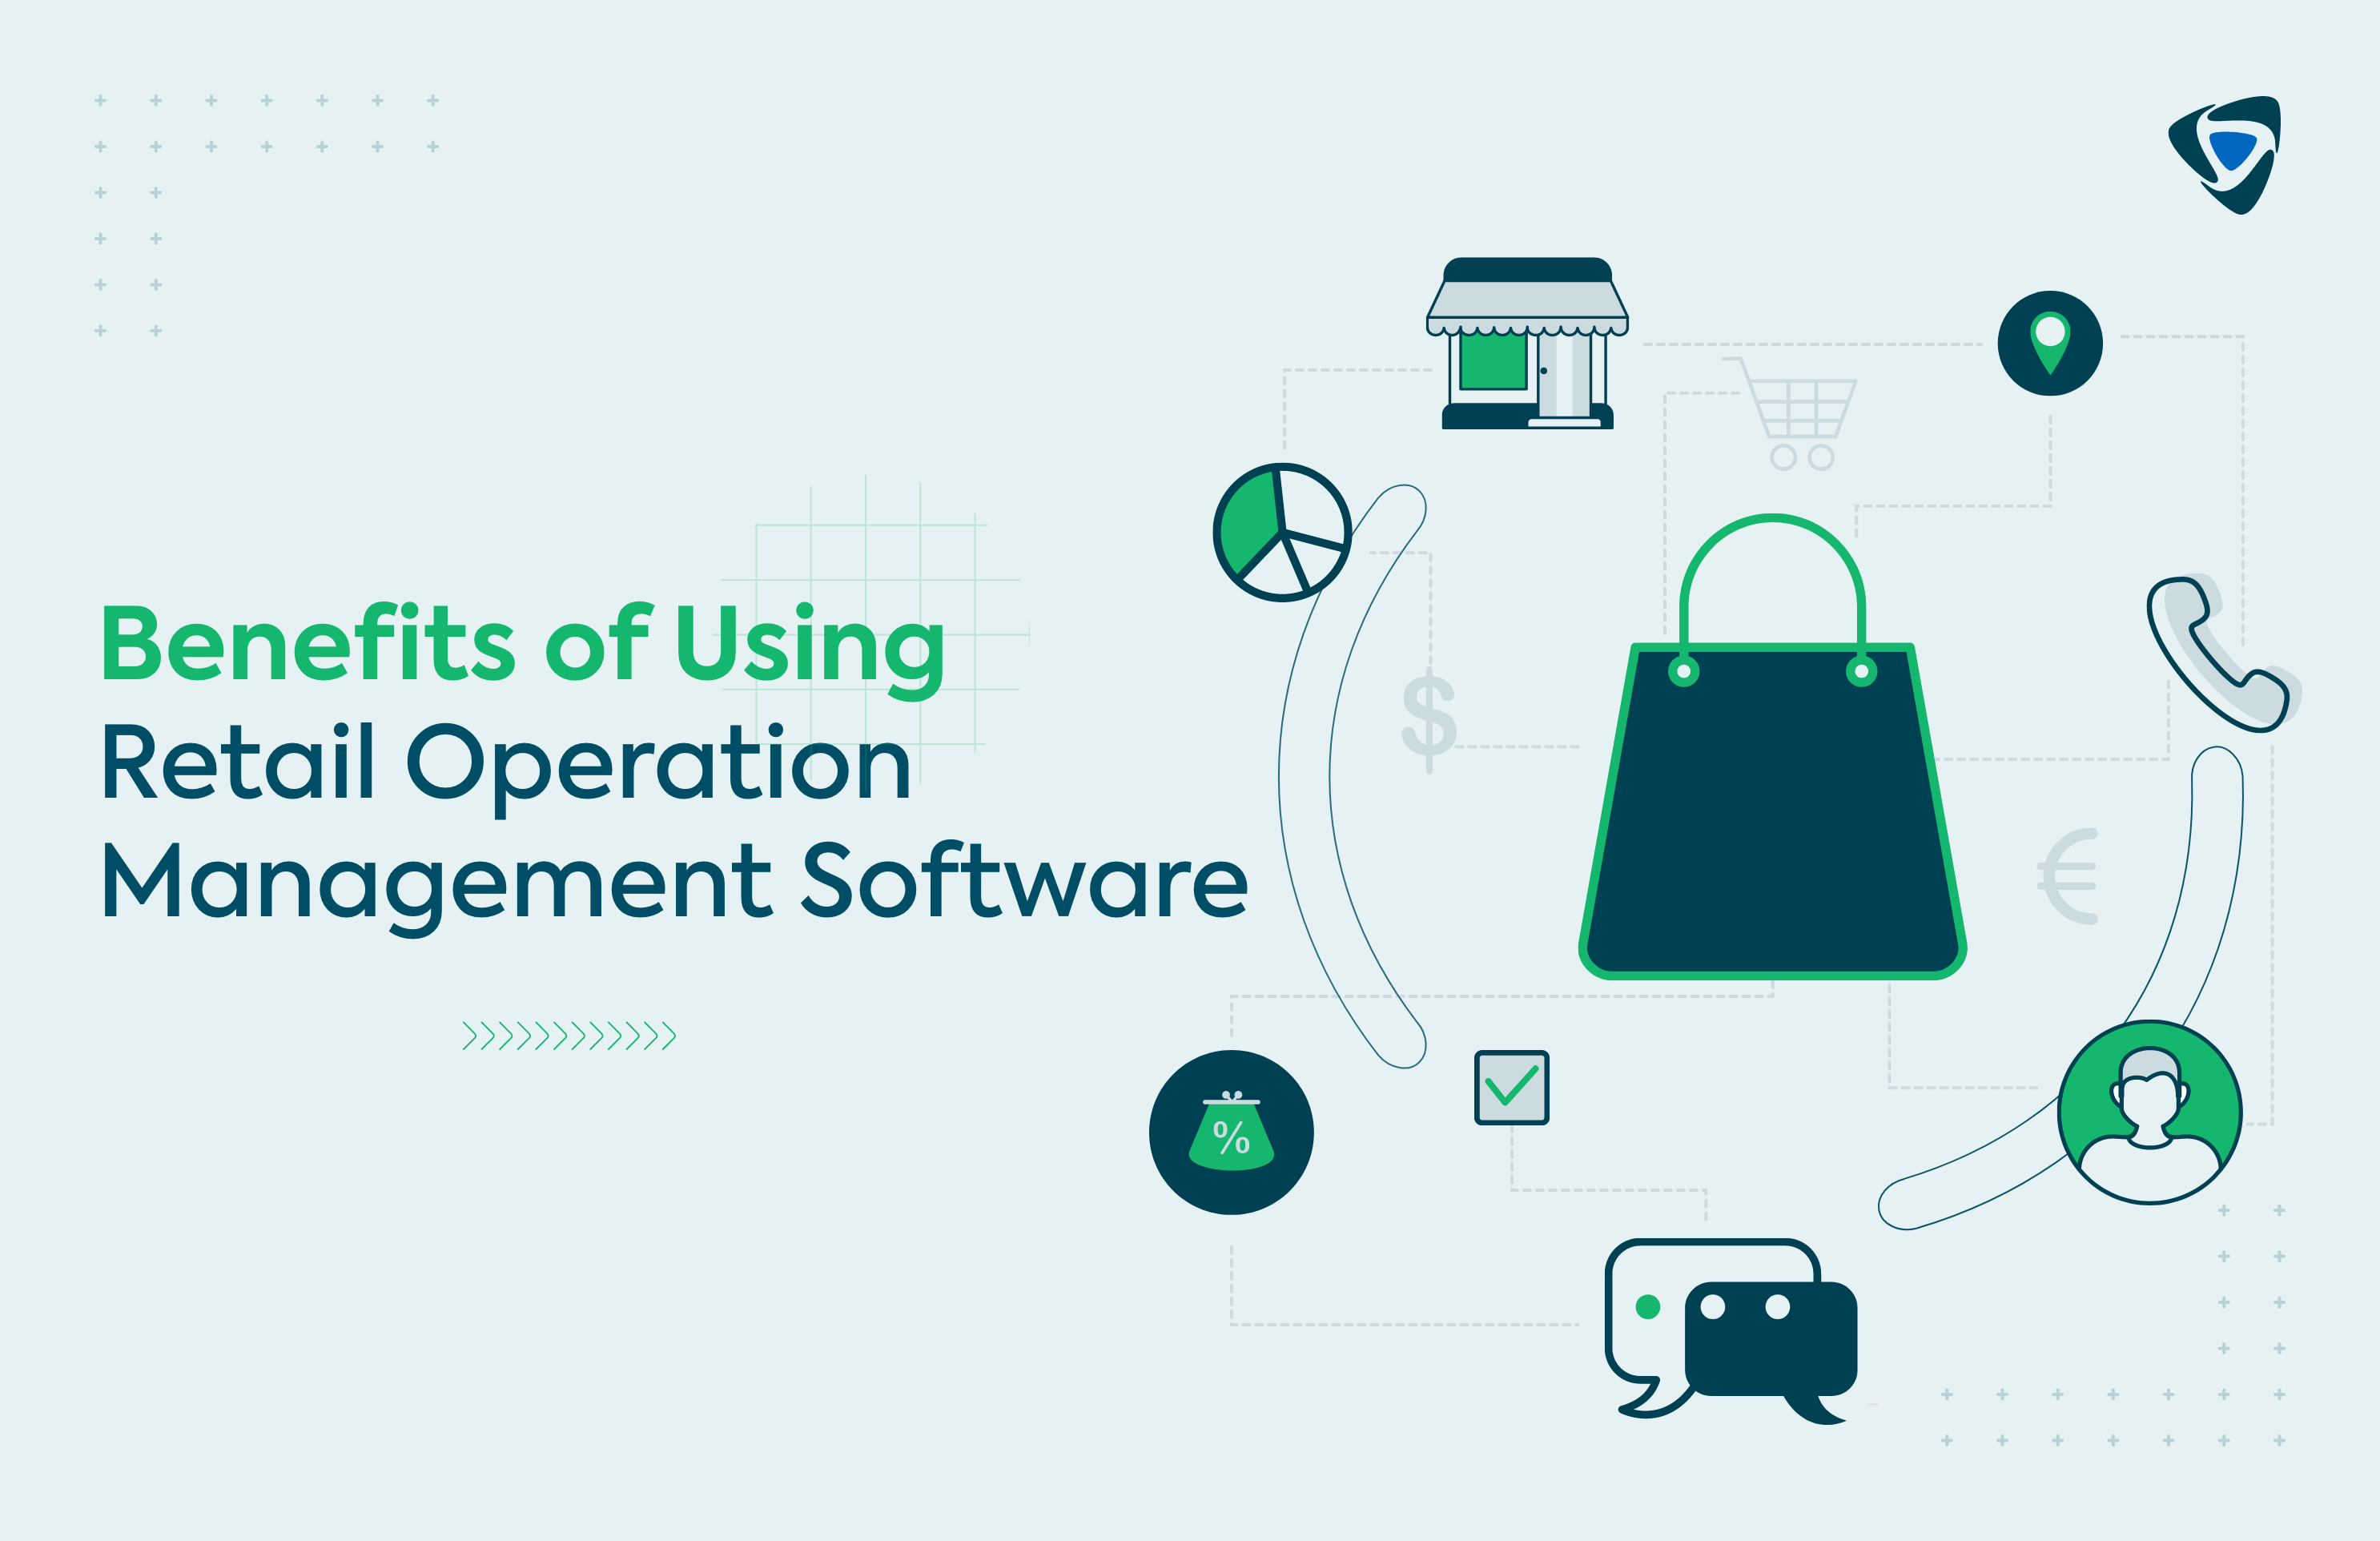 Benefits of Using Retail Operation Management Software